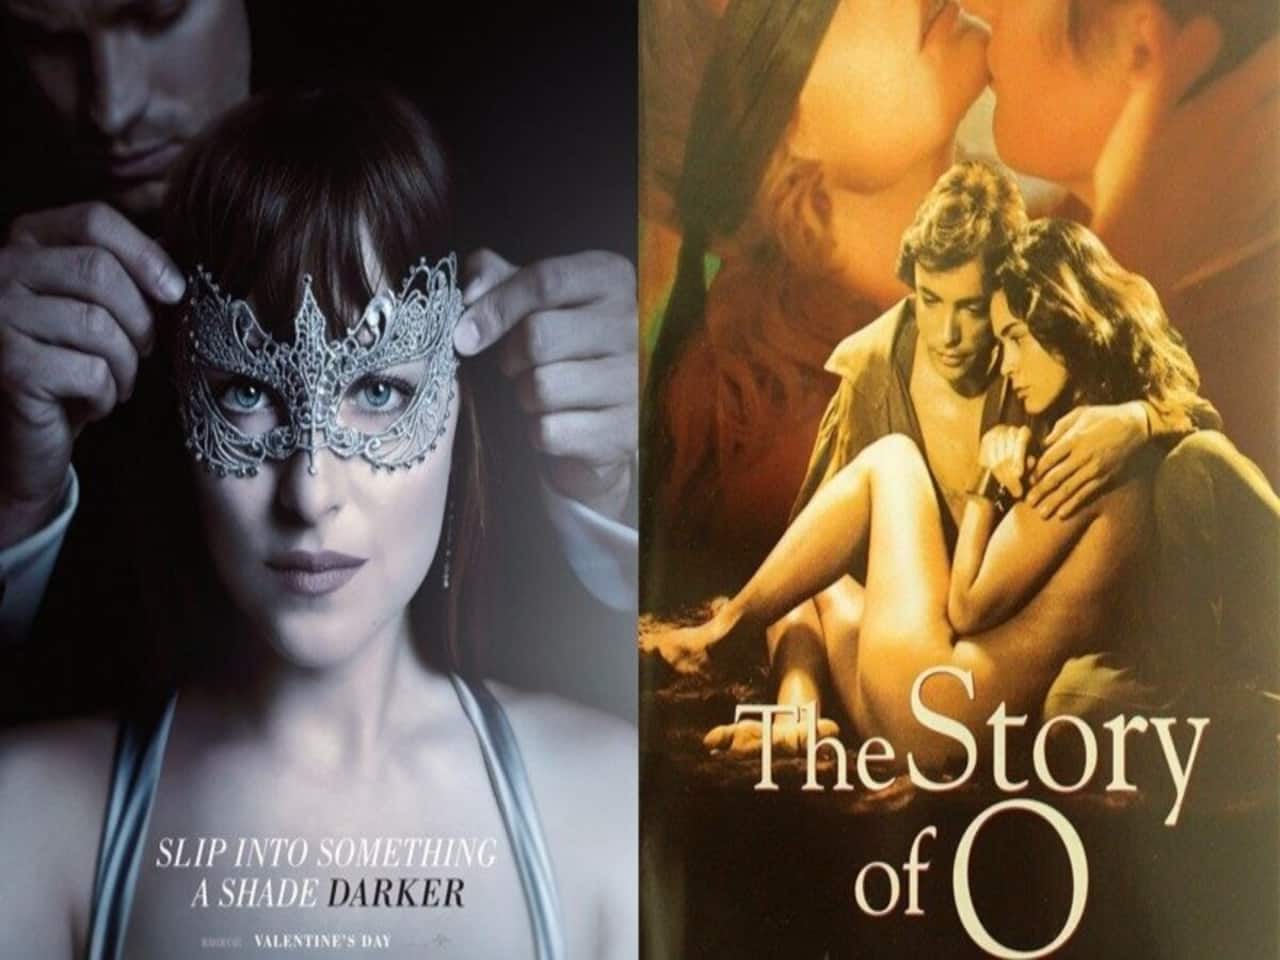 Fifty Shades of Grey and The Story of O